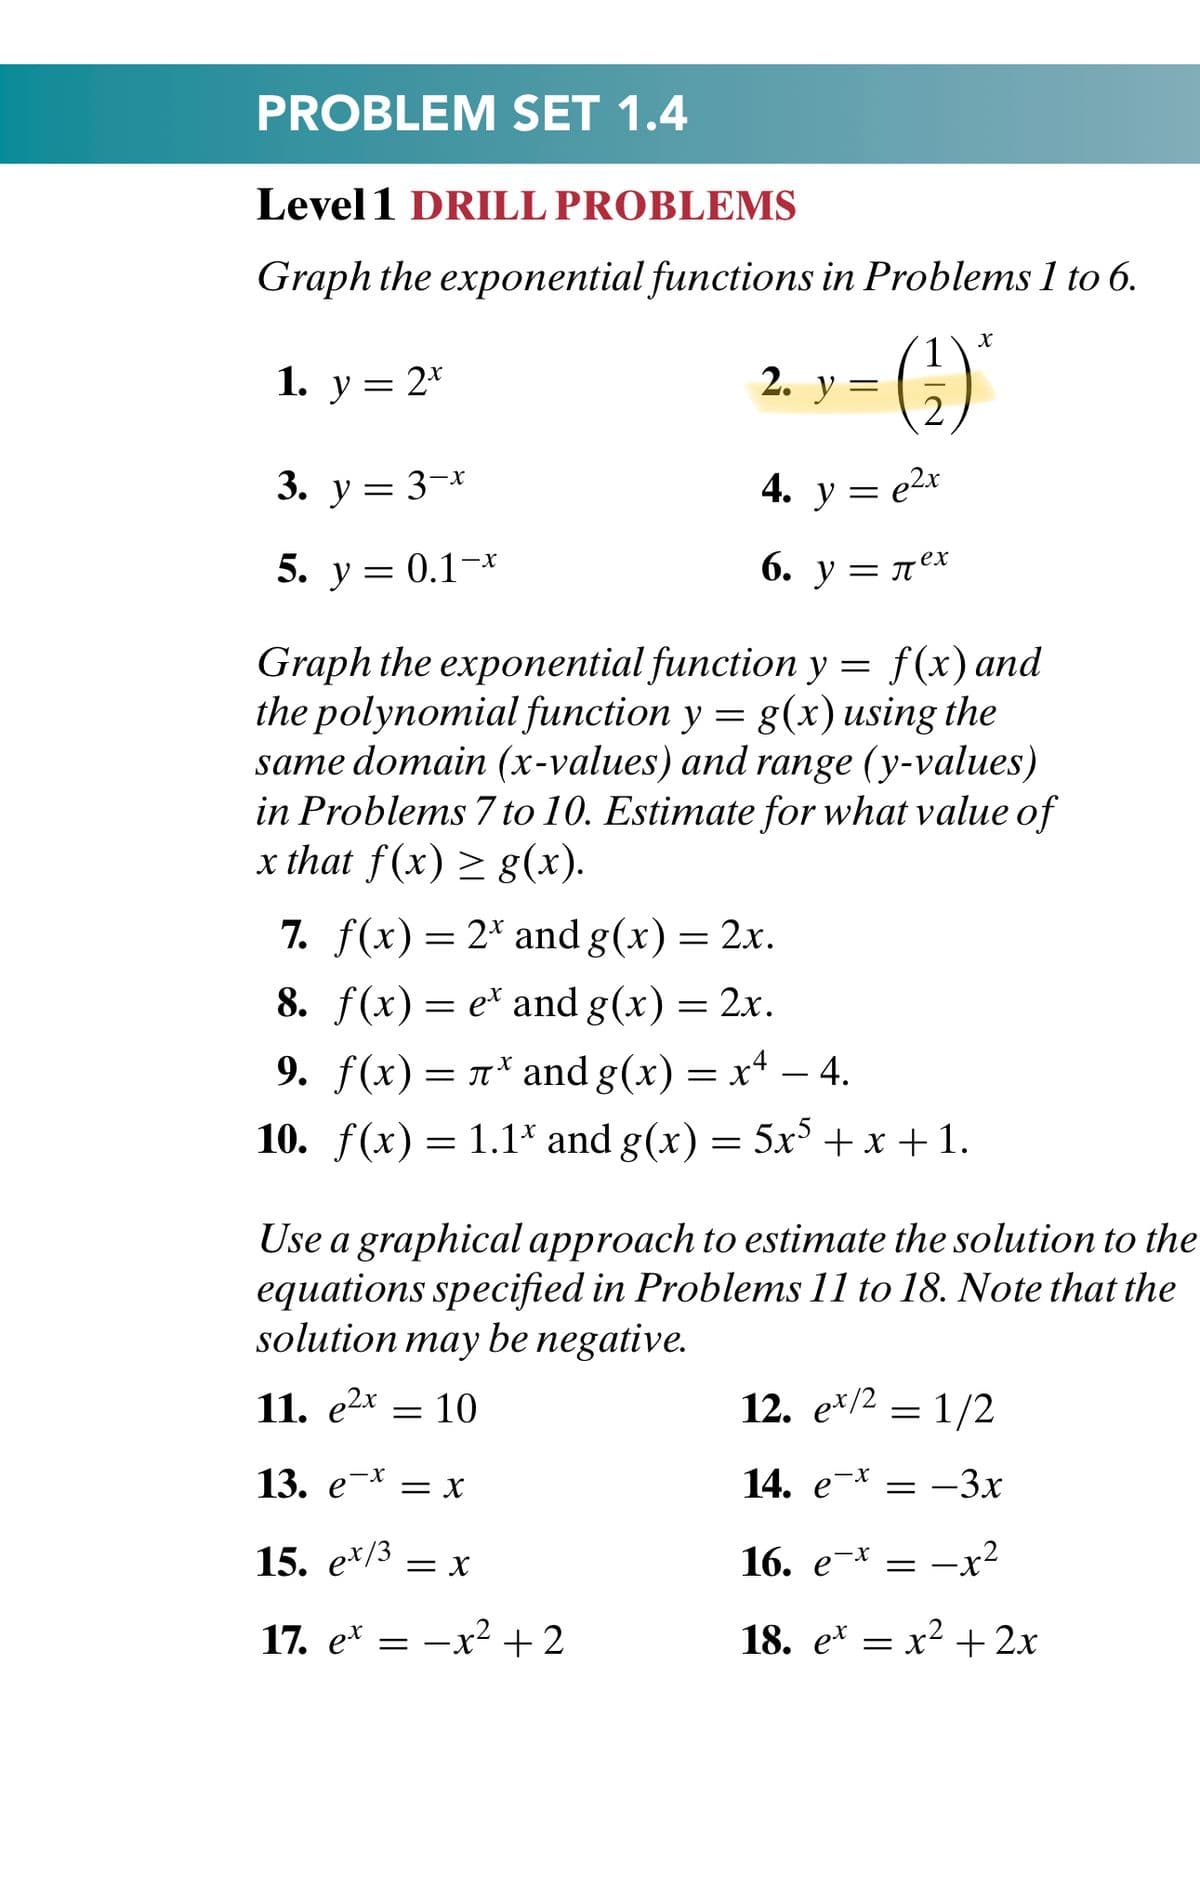 PROBLEM SET 1.4
Level 1 DRILL PROBLEMS
Graph the exponential functions in Problems 1 to 6.
()
1. у 3 2*
2. y =
3. у 3 3-х
4. y = e2x
5. у %3 0.1-х
6. у — лех
Graph the exponential function y = f(x) and
the polynomial function y = g(x) using the
same domain (x-values) and range (y-values)
in Problems 7 to 10. Estimate for what value of
x that f(x) > g(x).
7. f(x) = 2* and g(x) = 2x.
8. f(x) — е* and g(x) 3D 2x.
9. f(x)= 1* and g(x) = x4 – 4.
-
10. f(x) = 1.1* and g(x) = 5x + x + 1.
Use a graphical approach to estimate the solution to the
equations specified in Problems 11 to 18. Note that the
solution may be negative.
11. e2x = 10
12. е*/2
1/2
14. e-*
= -3x
-x
13. е* —х
15. e*/3 = x
16. e-* = -x²
17. e* = -x2 +2
18. e* = x2 + 2x
